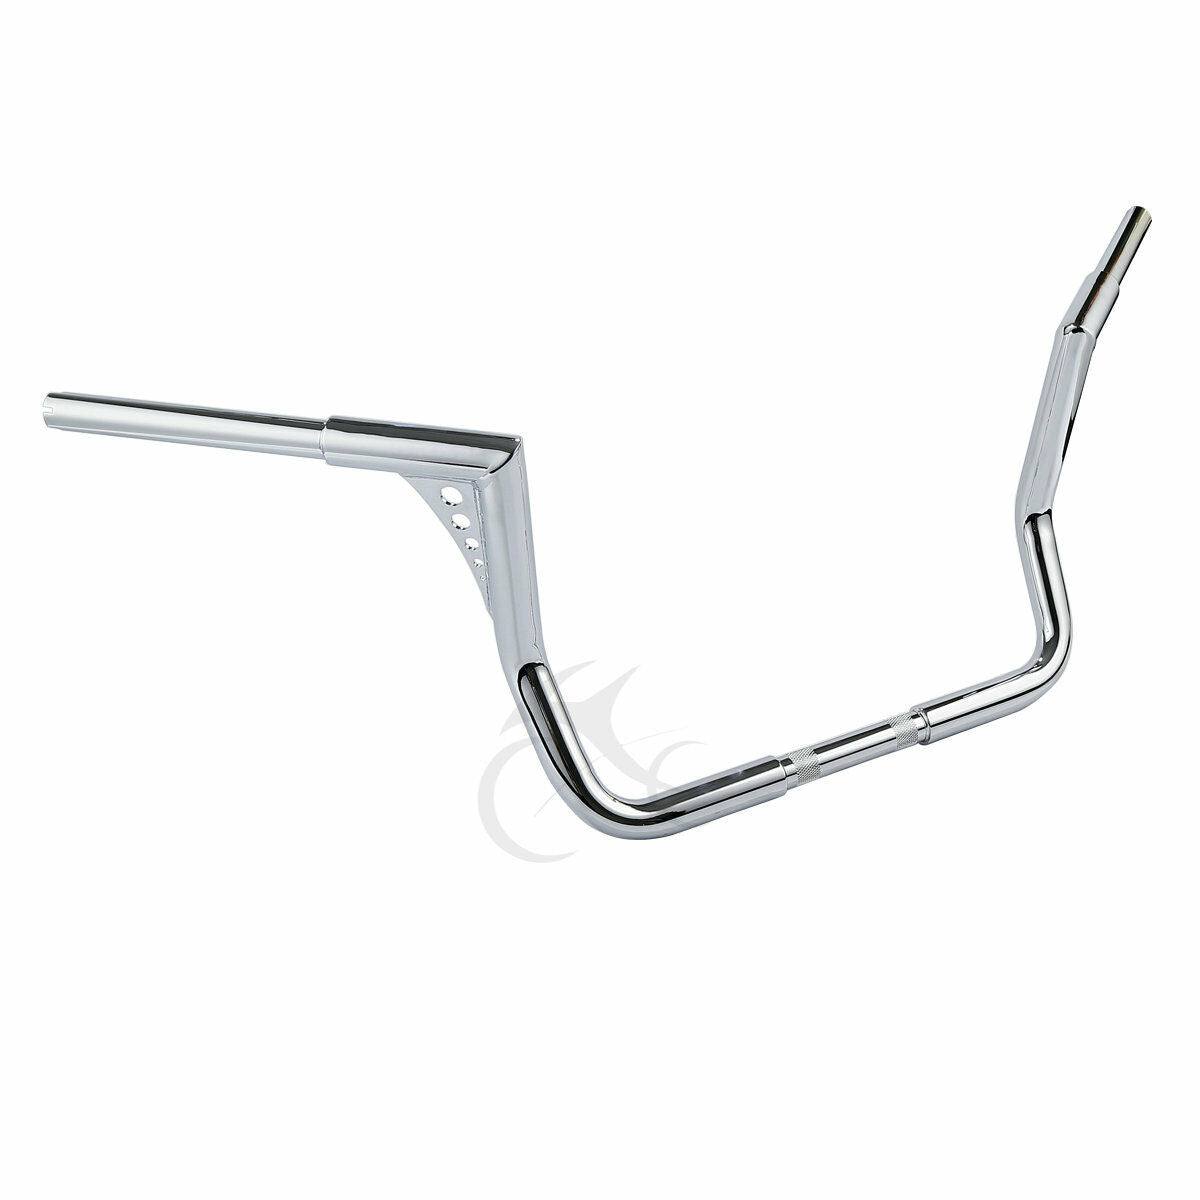 Rise 12" Ape Hanger Handlebar 1-1/4" Fit For Harley Touring Dressers Baggers - Moto Life Products